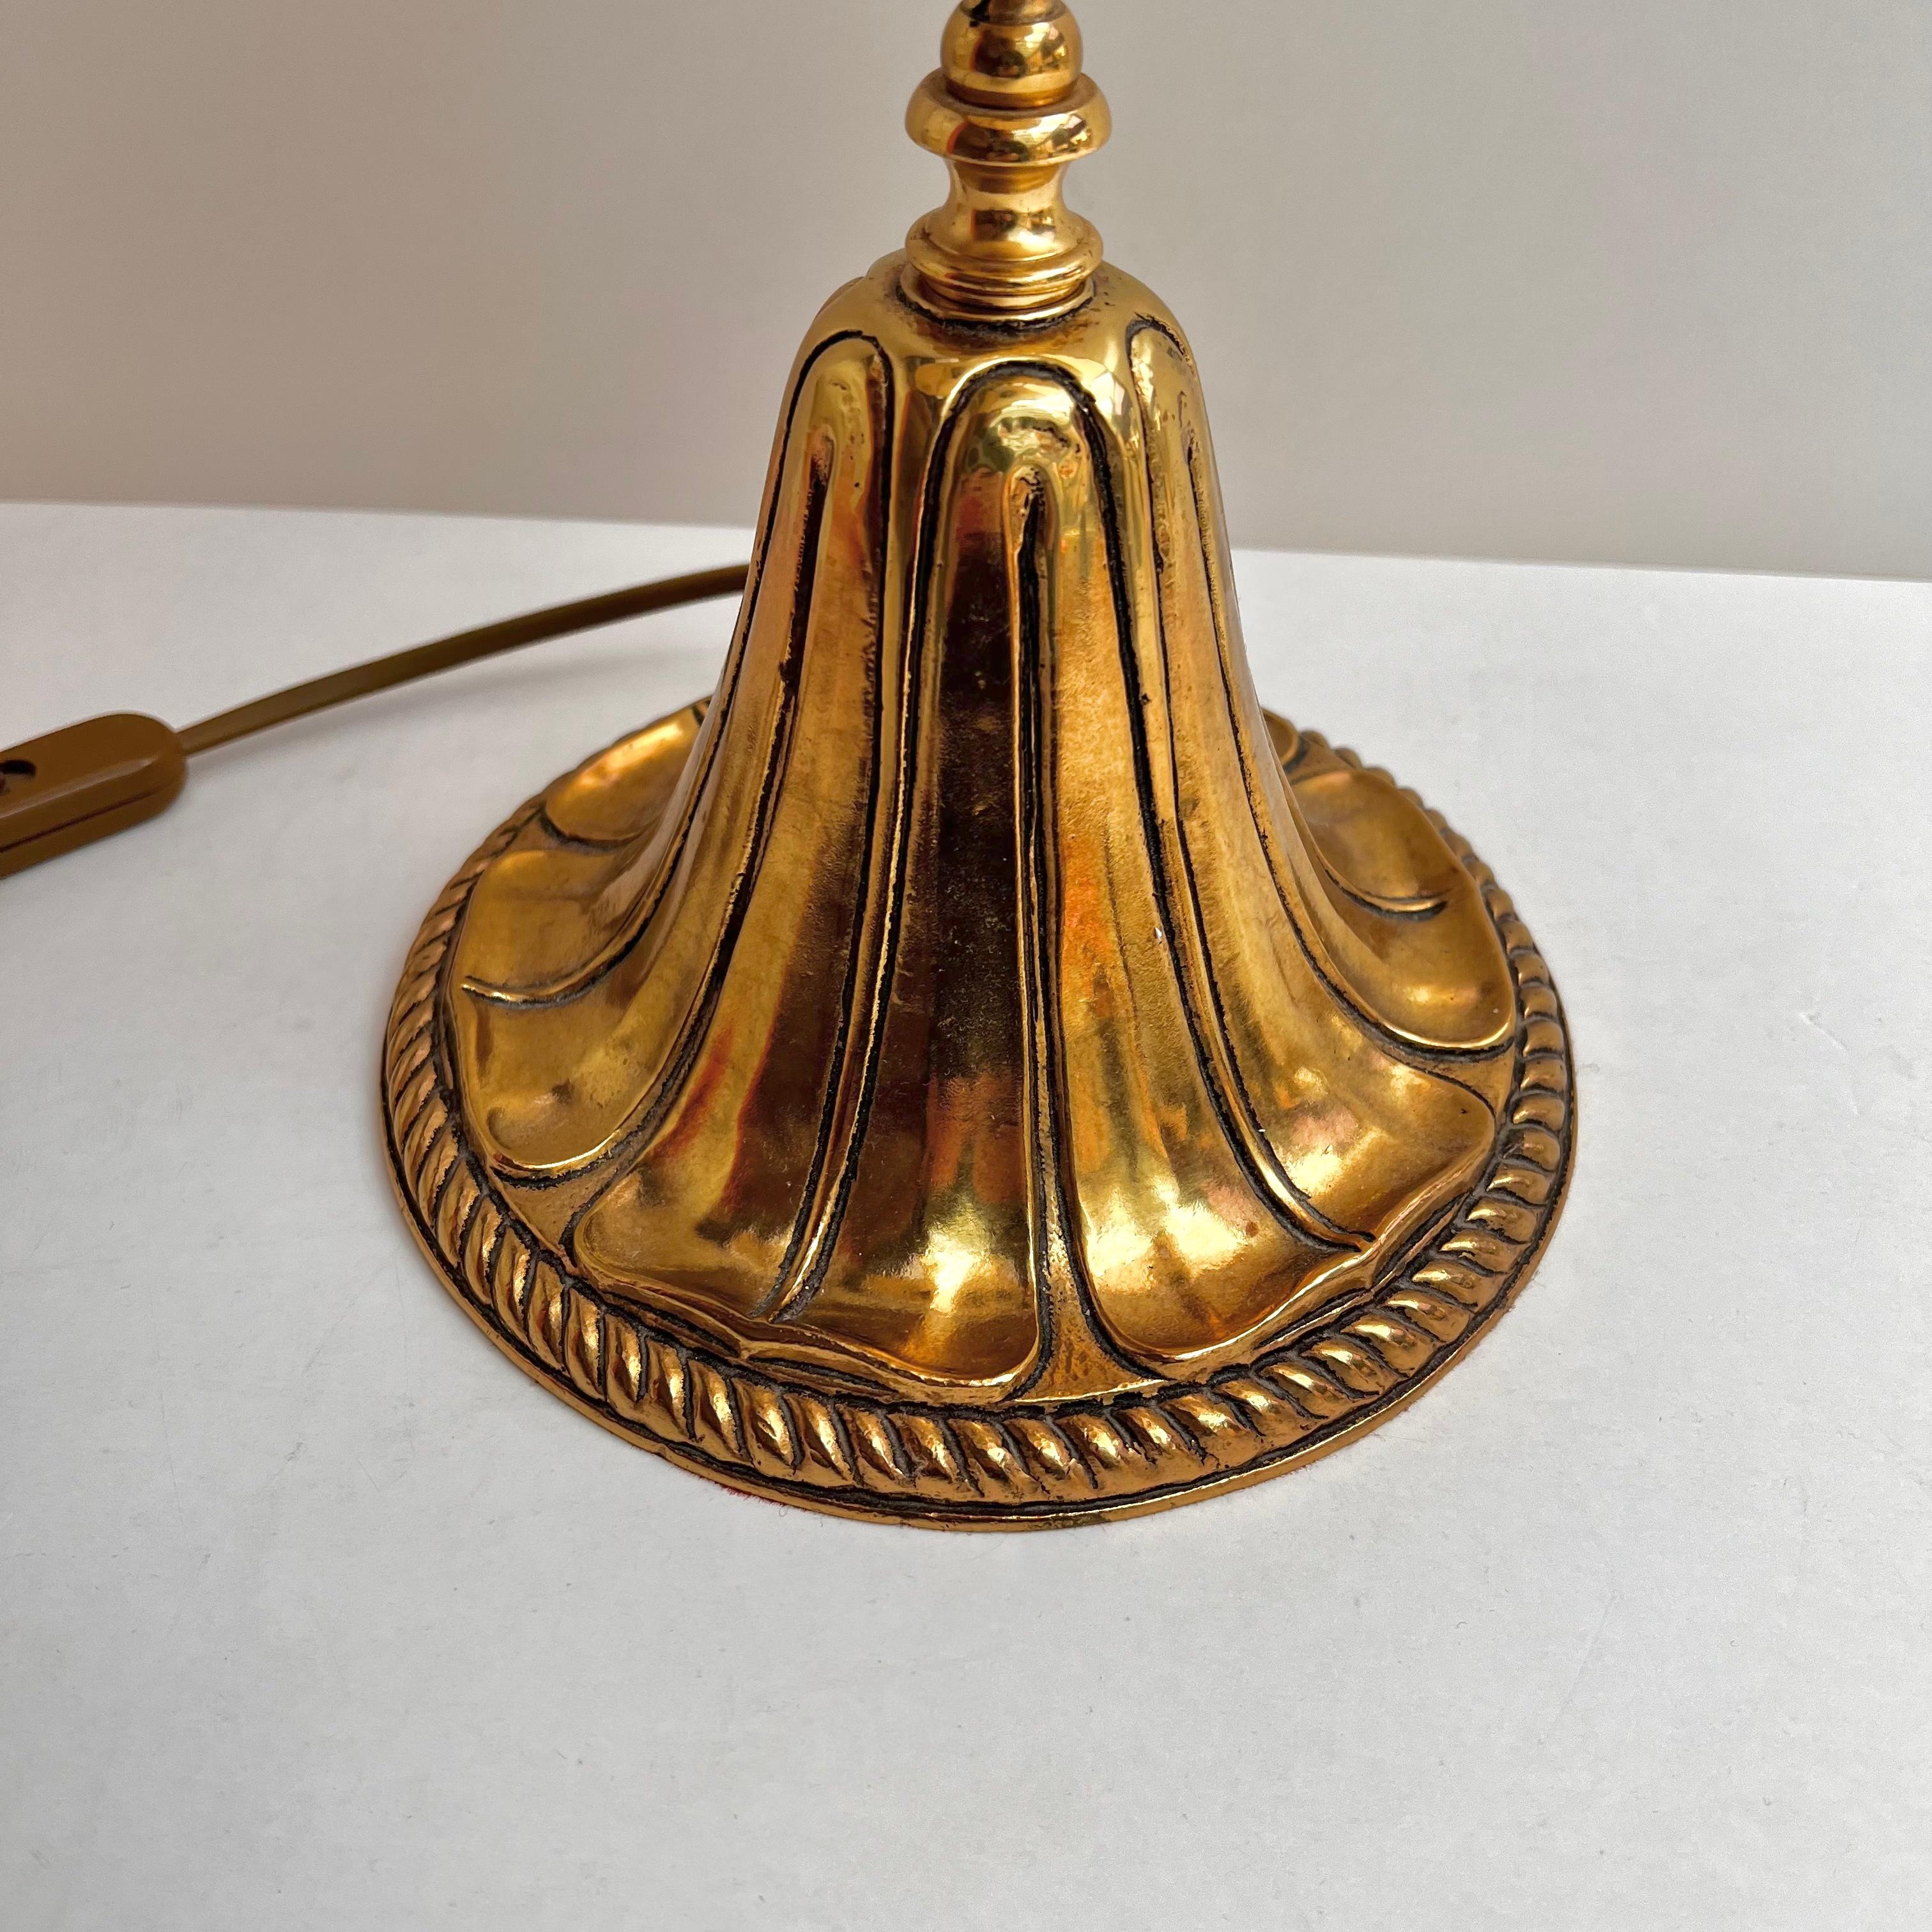 Art Nouveau style vintage table lamp from Bronceart Torrent, Spain, 1980

This charming Art Nouveau table lamp features beautiful gilded brass details with typical Art Nouveau lines and ornaments. Attractive cream marble shade with brown color